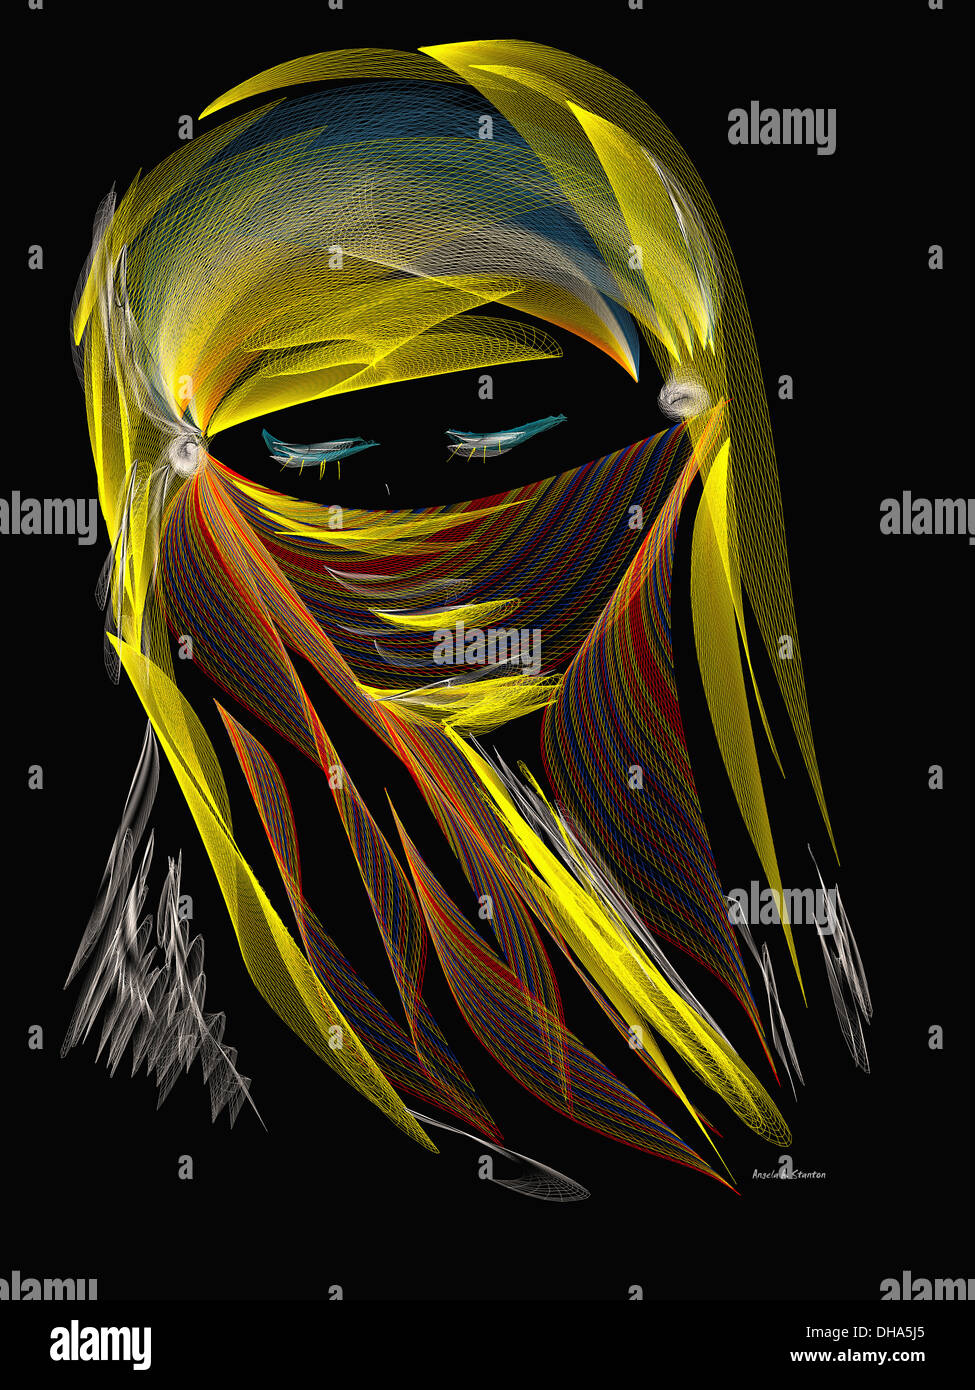 Computer Generated Image Of A Woman's Eyes Peering From A Headscarf Stock Photo